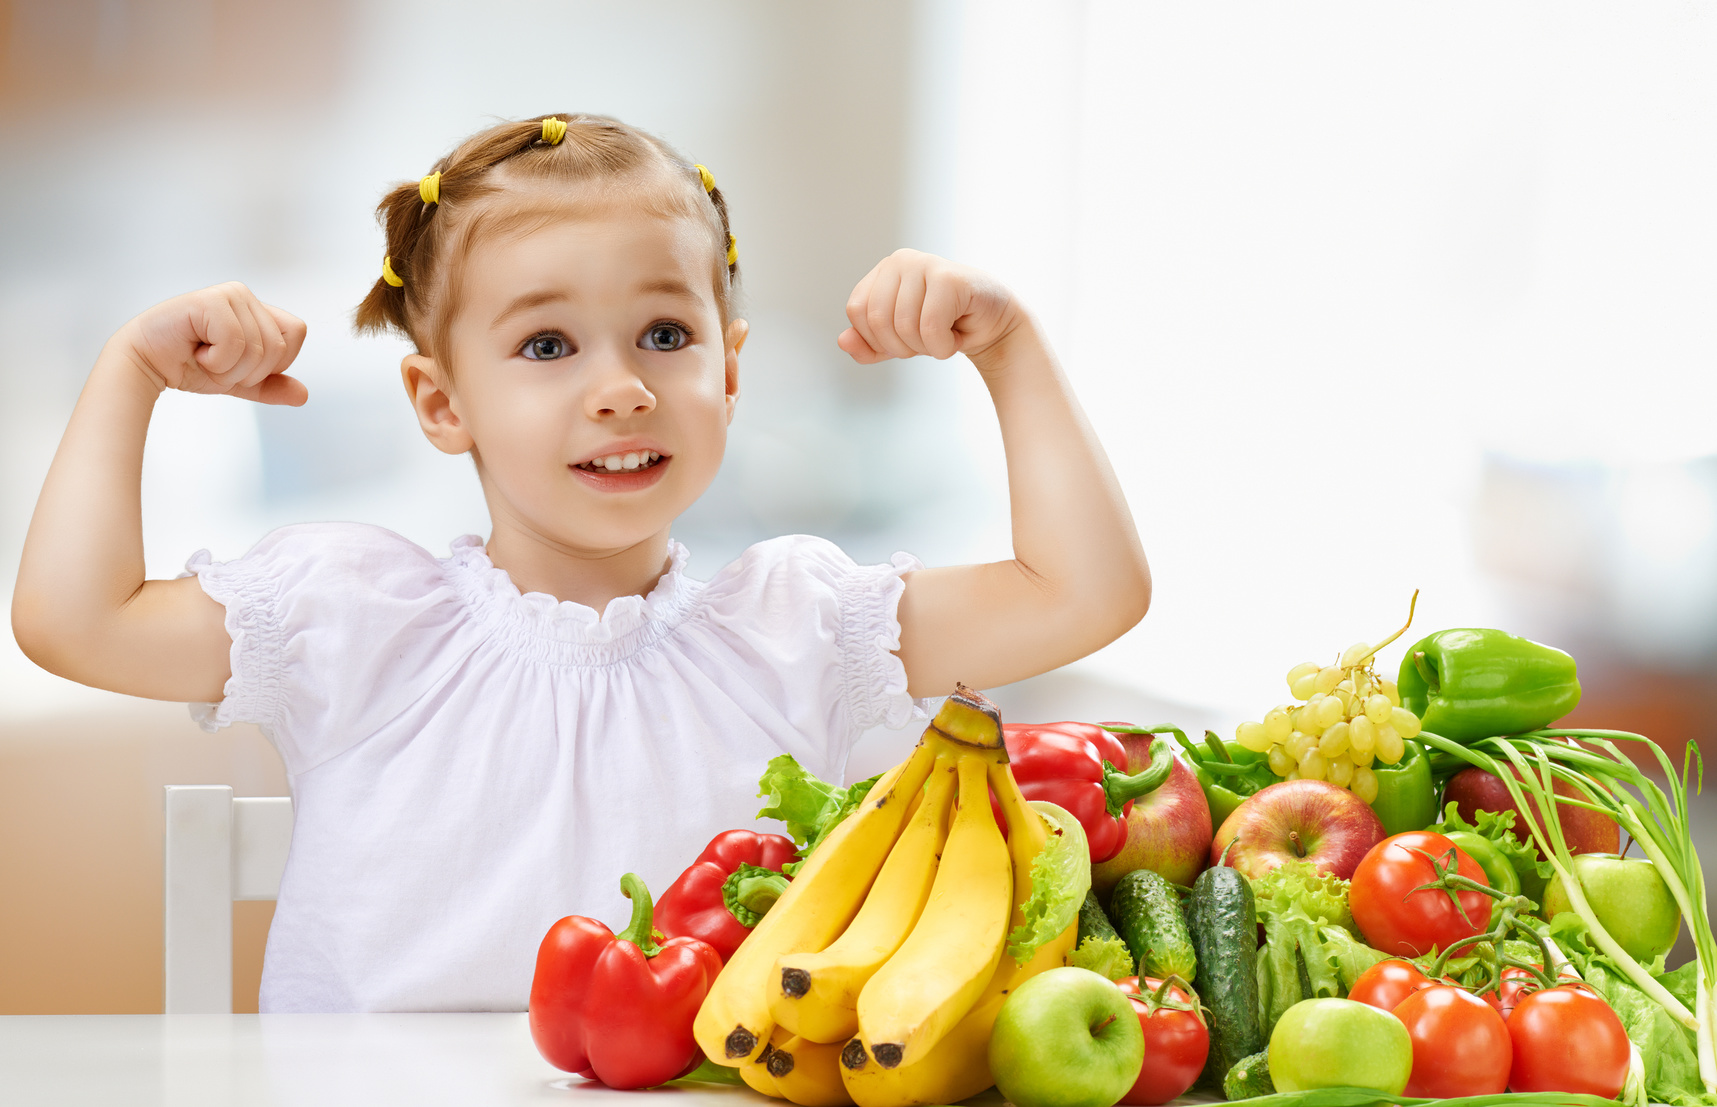 Nutrition for Kids - A Short Age-By-Age Might Be Useful